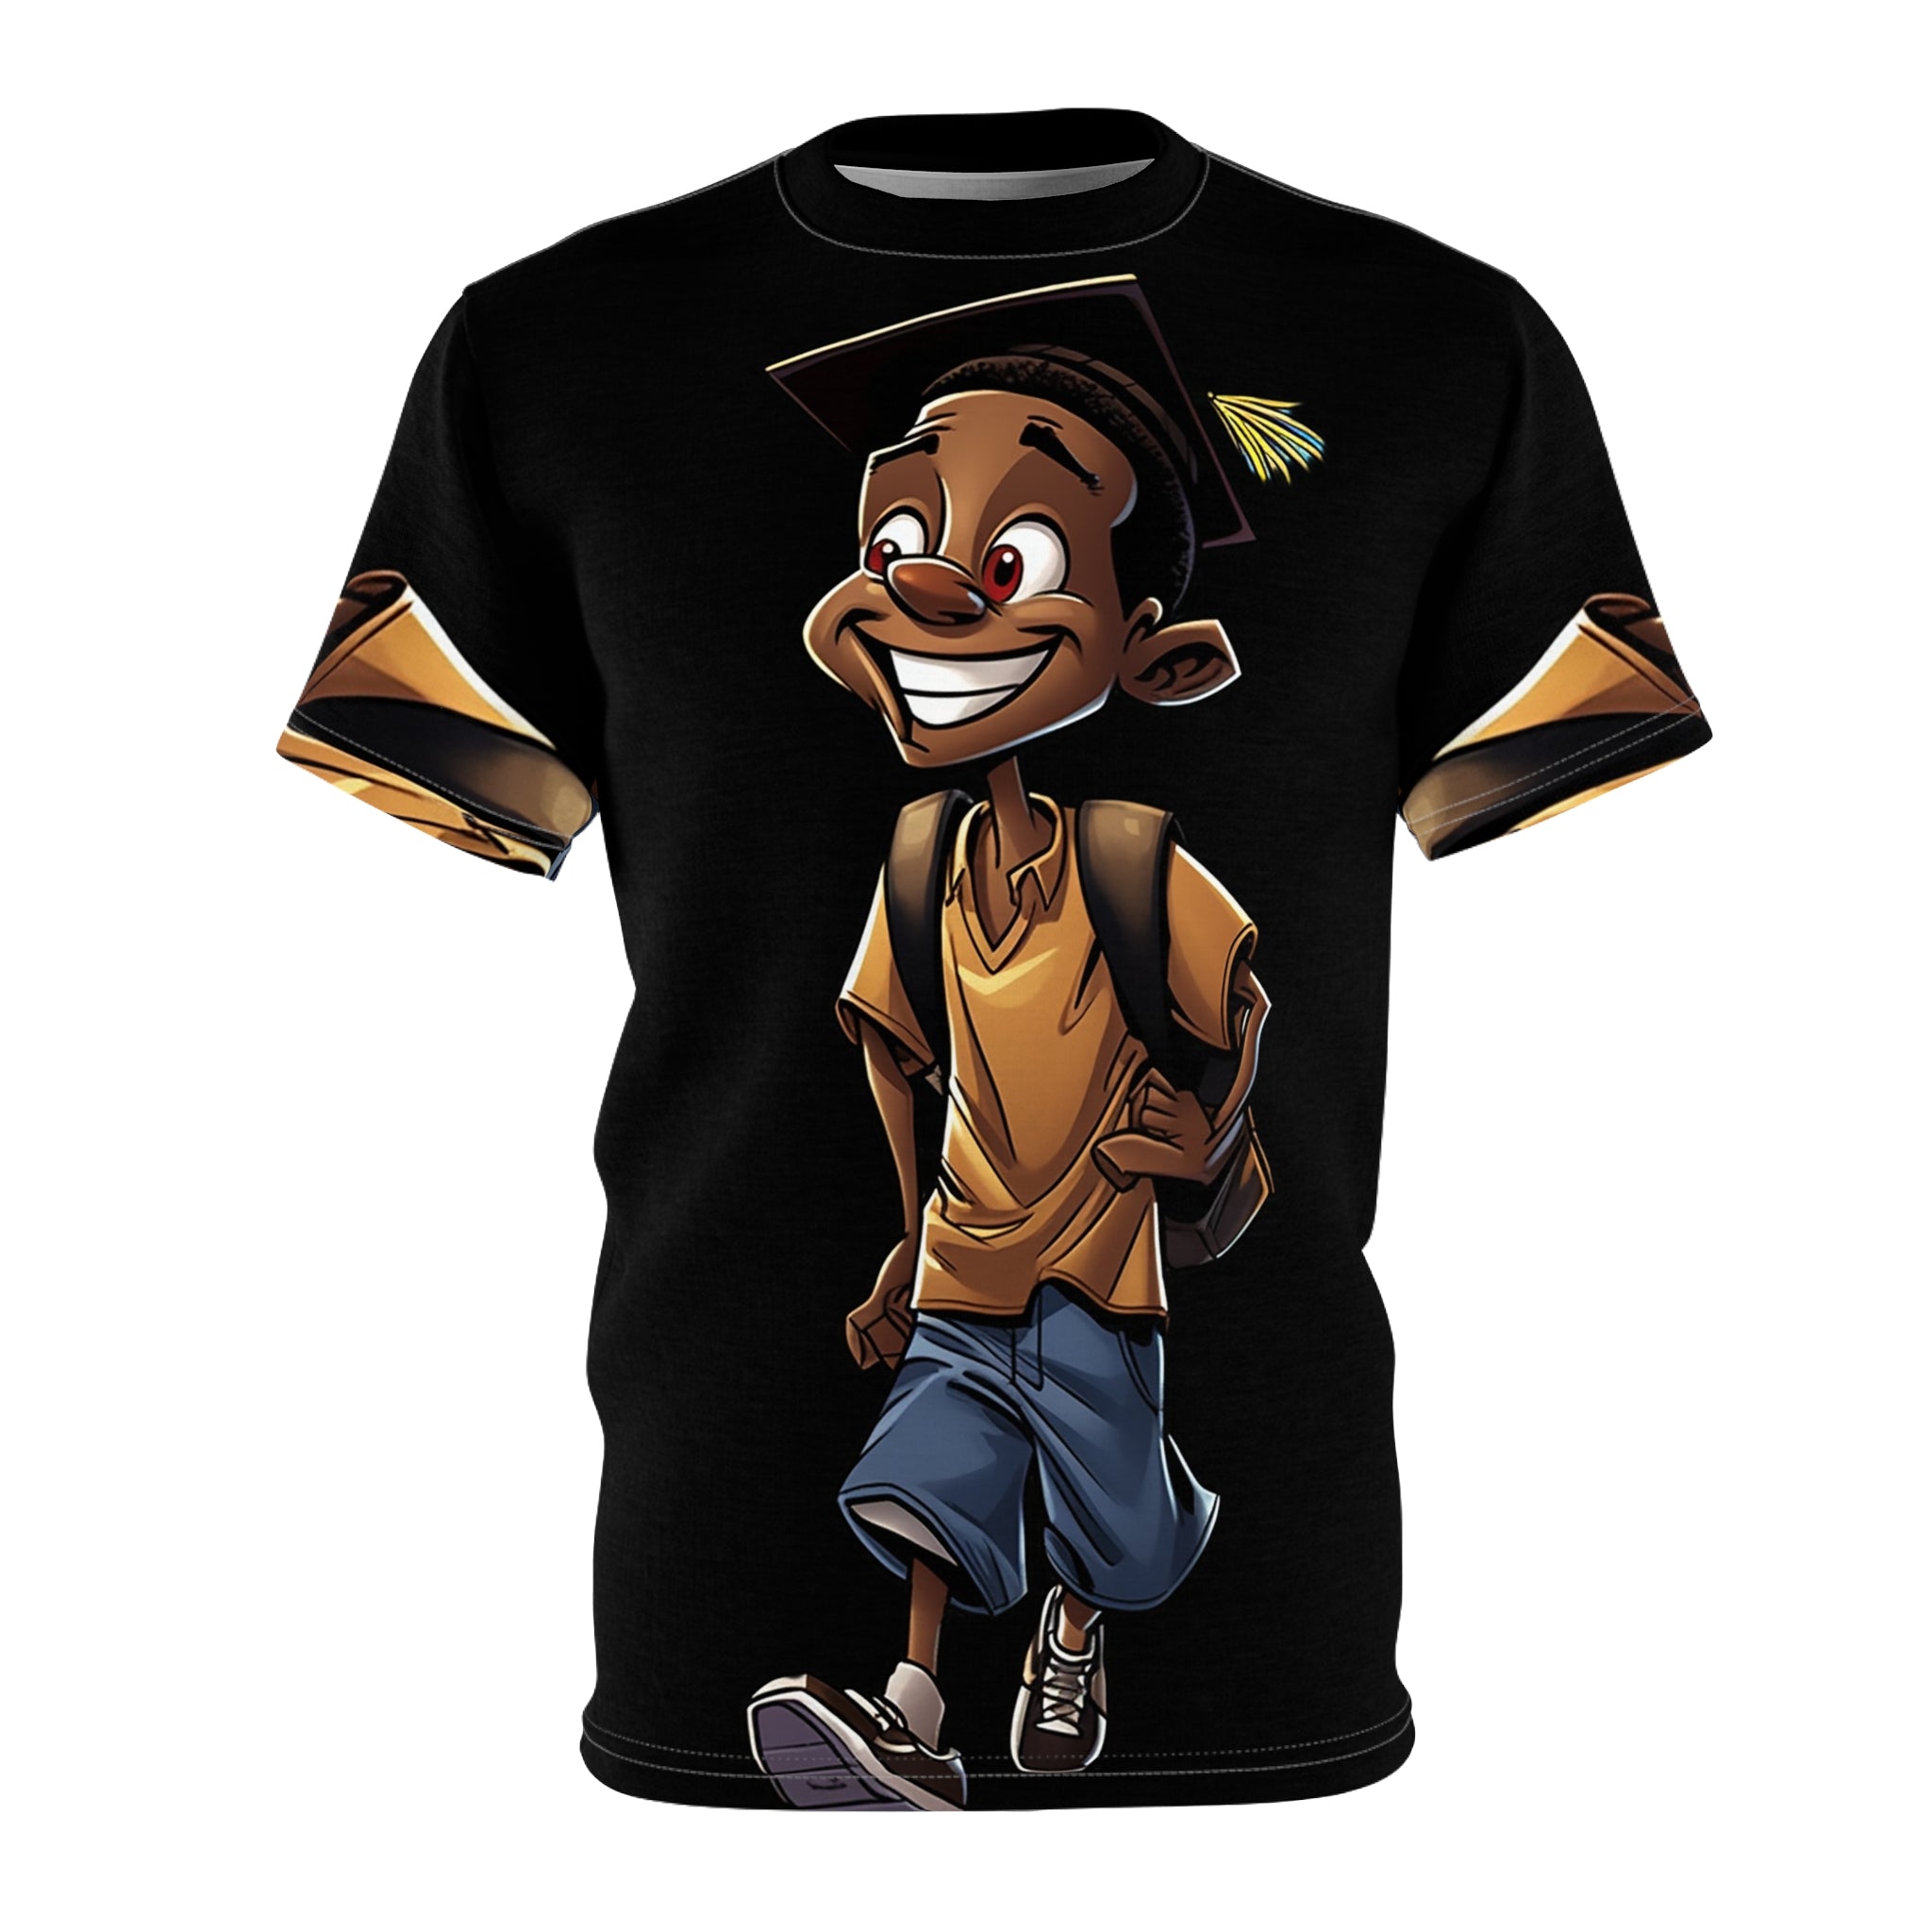 "THE SCHOLAR" - African American Themed Unisex T-shirt